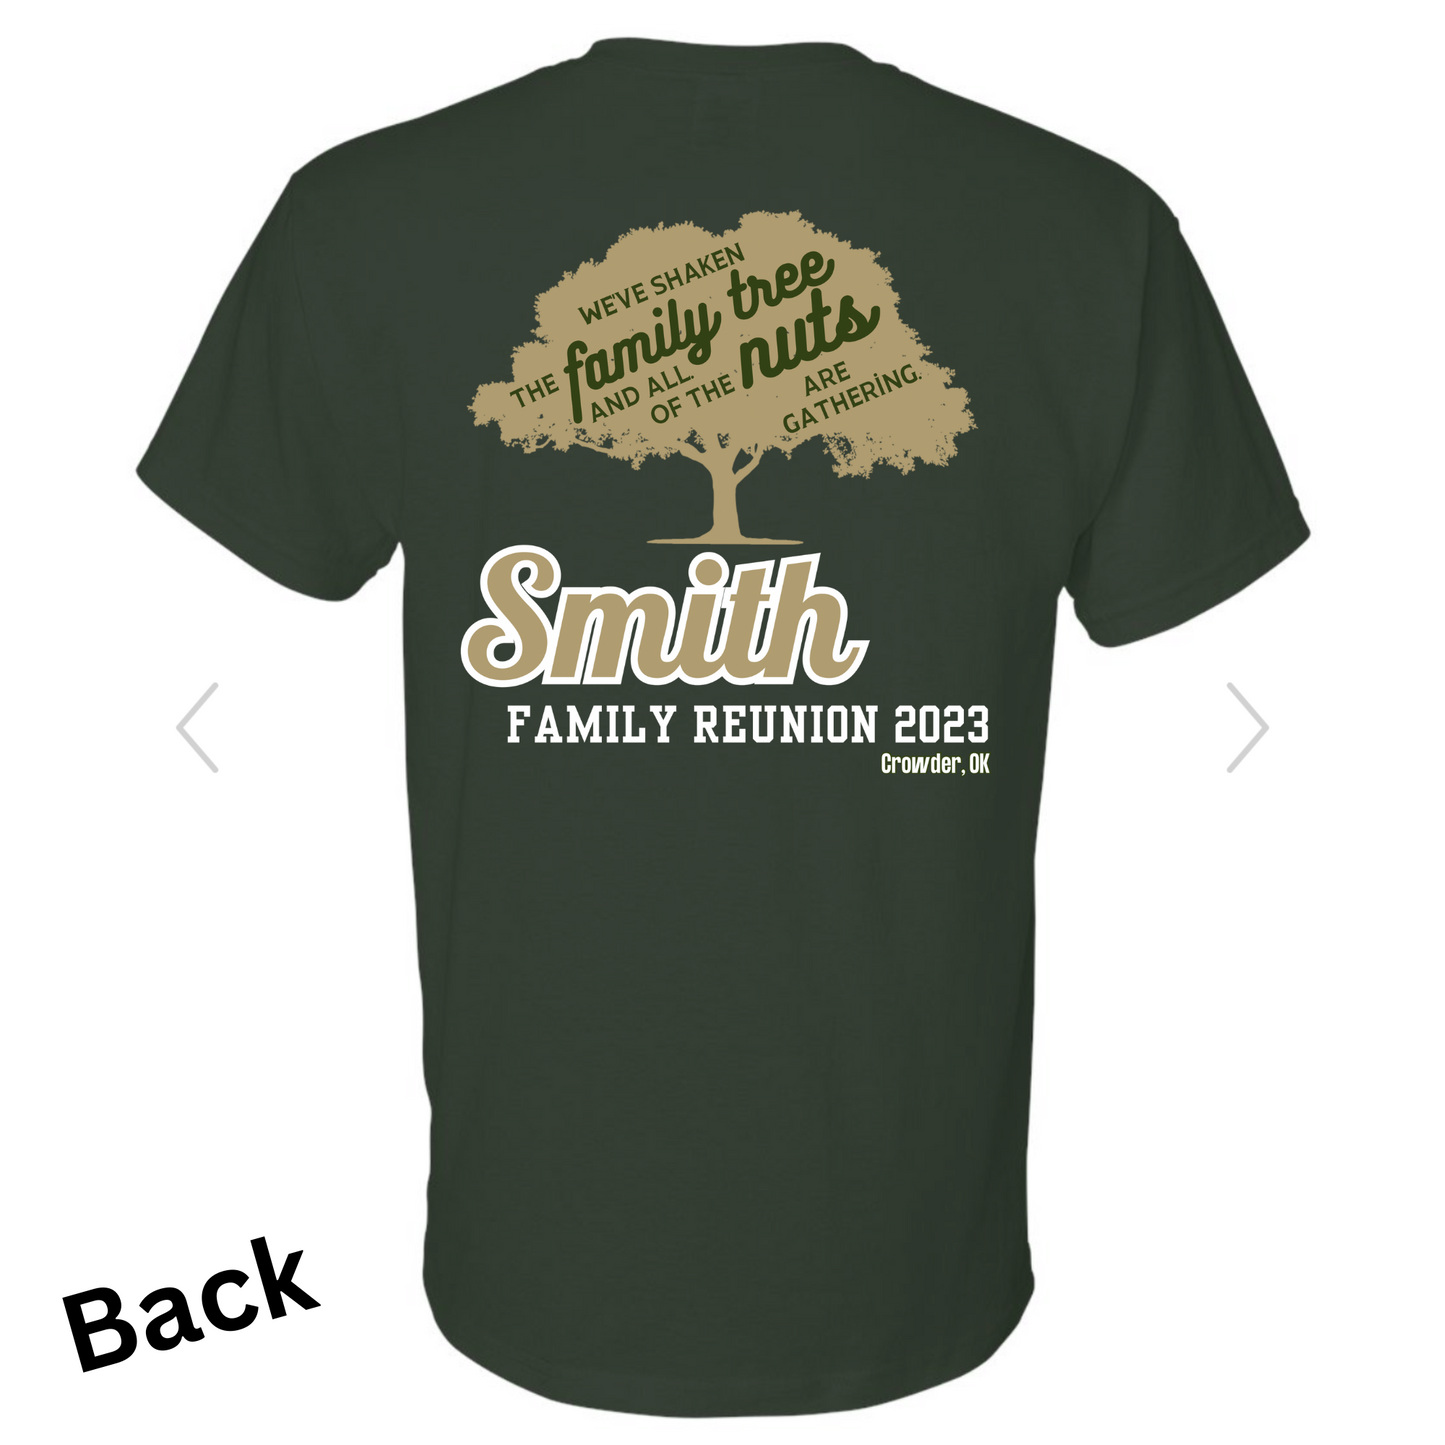 Smith Family Reunion T Shirt (Adult)